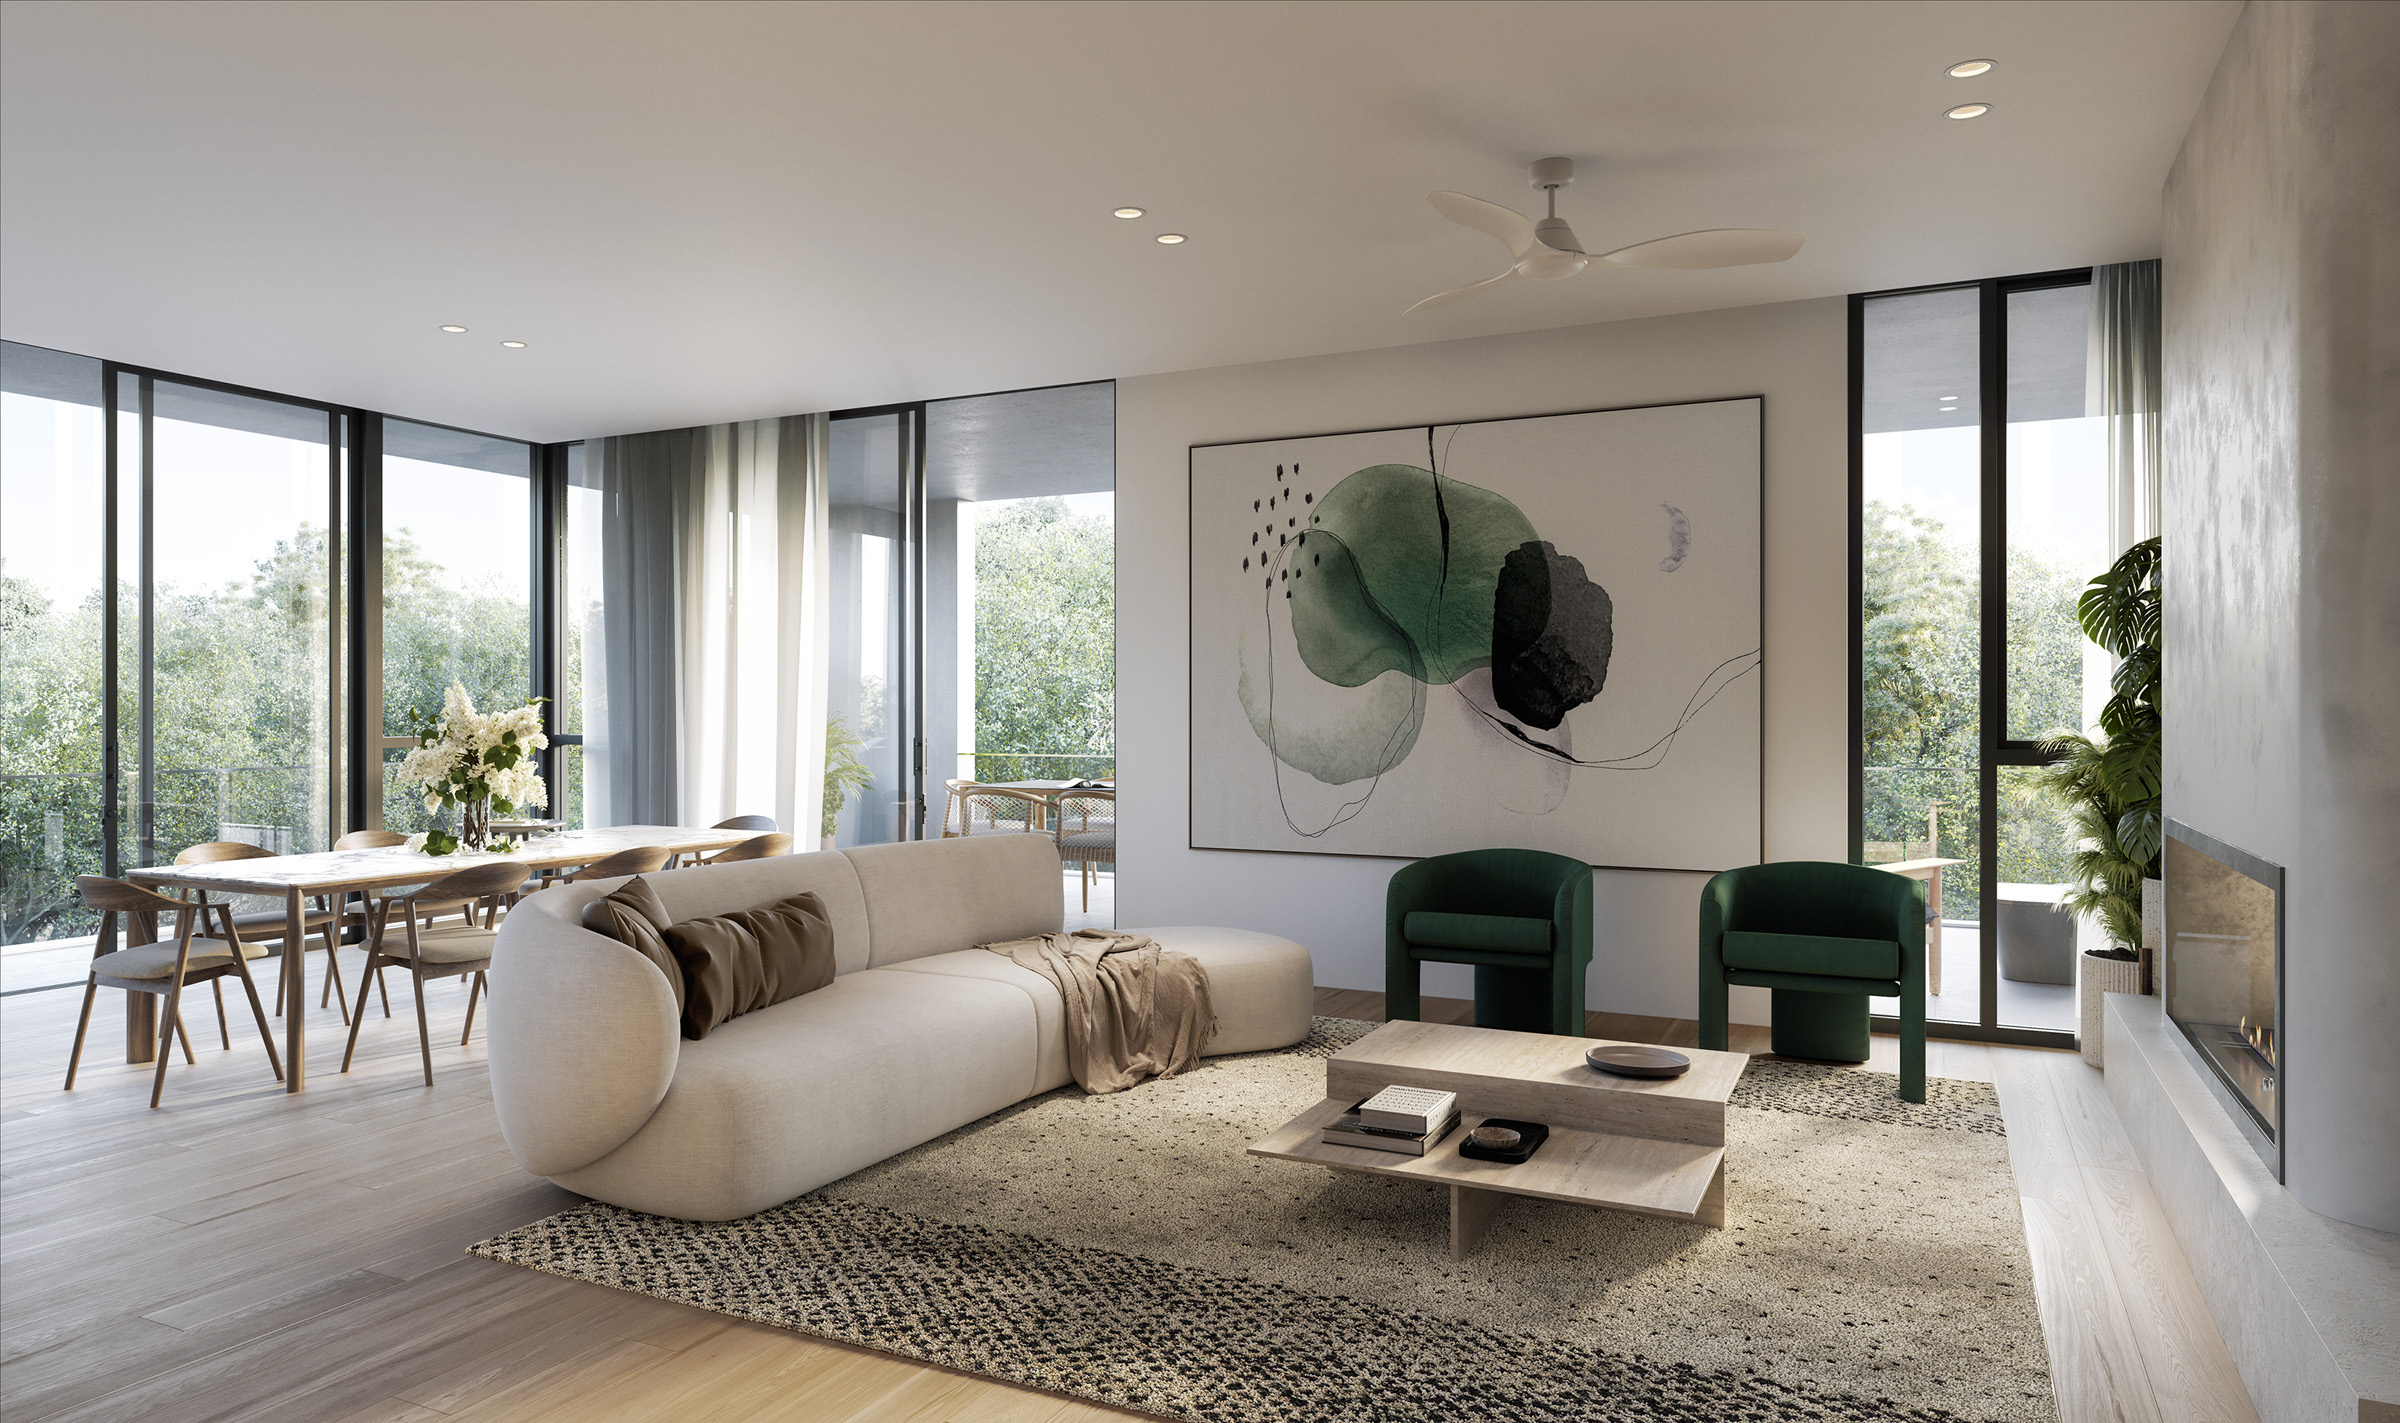 Internal Image of living room showing couch, coffee table and wall art at Florin Parkside.